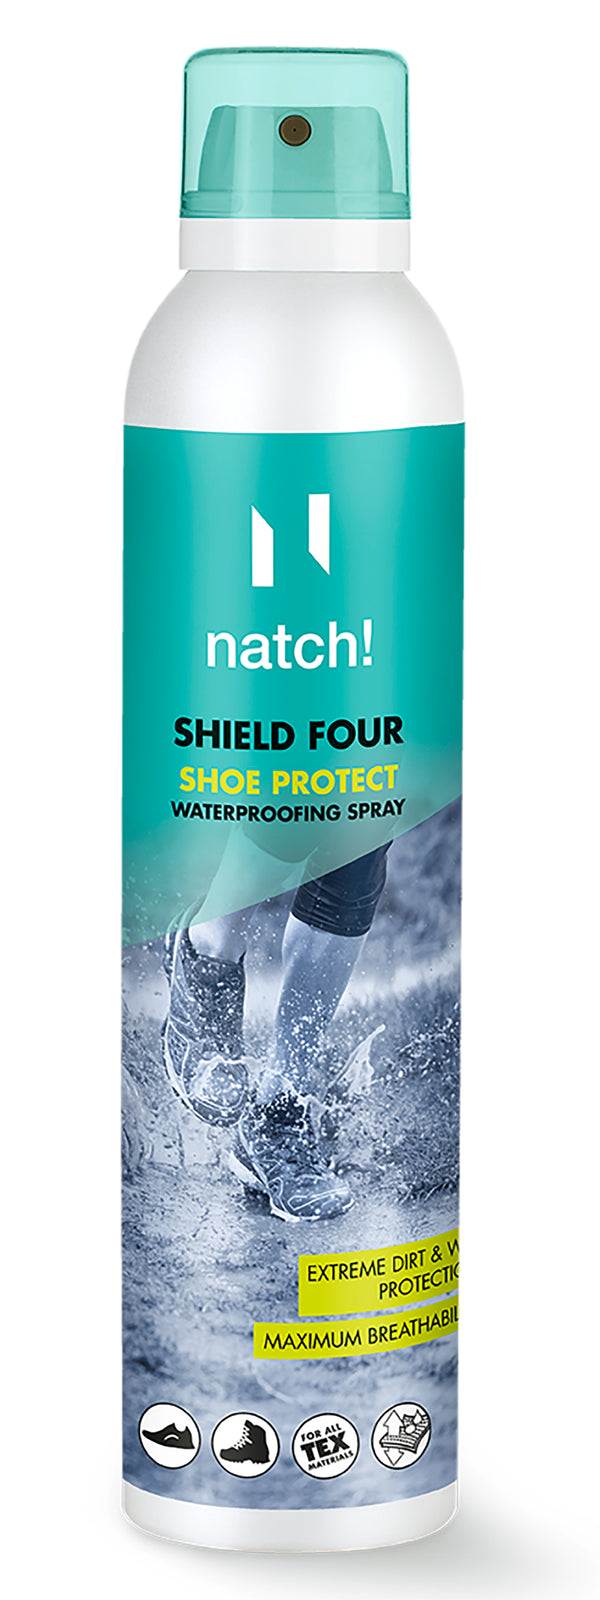 Natch Shield Four Shoe Protect Waterproofing Spray, 8.45 OZ - Trustables